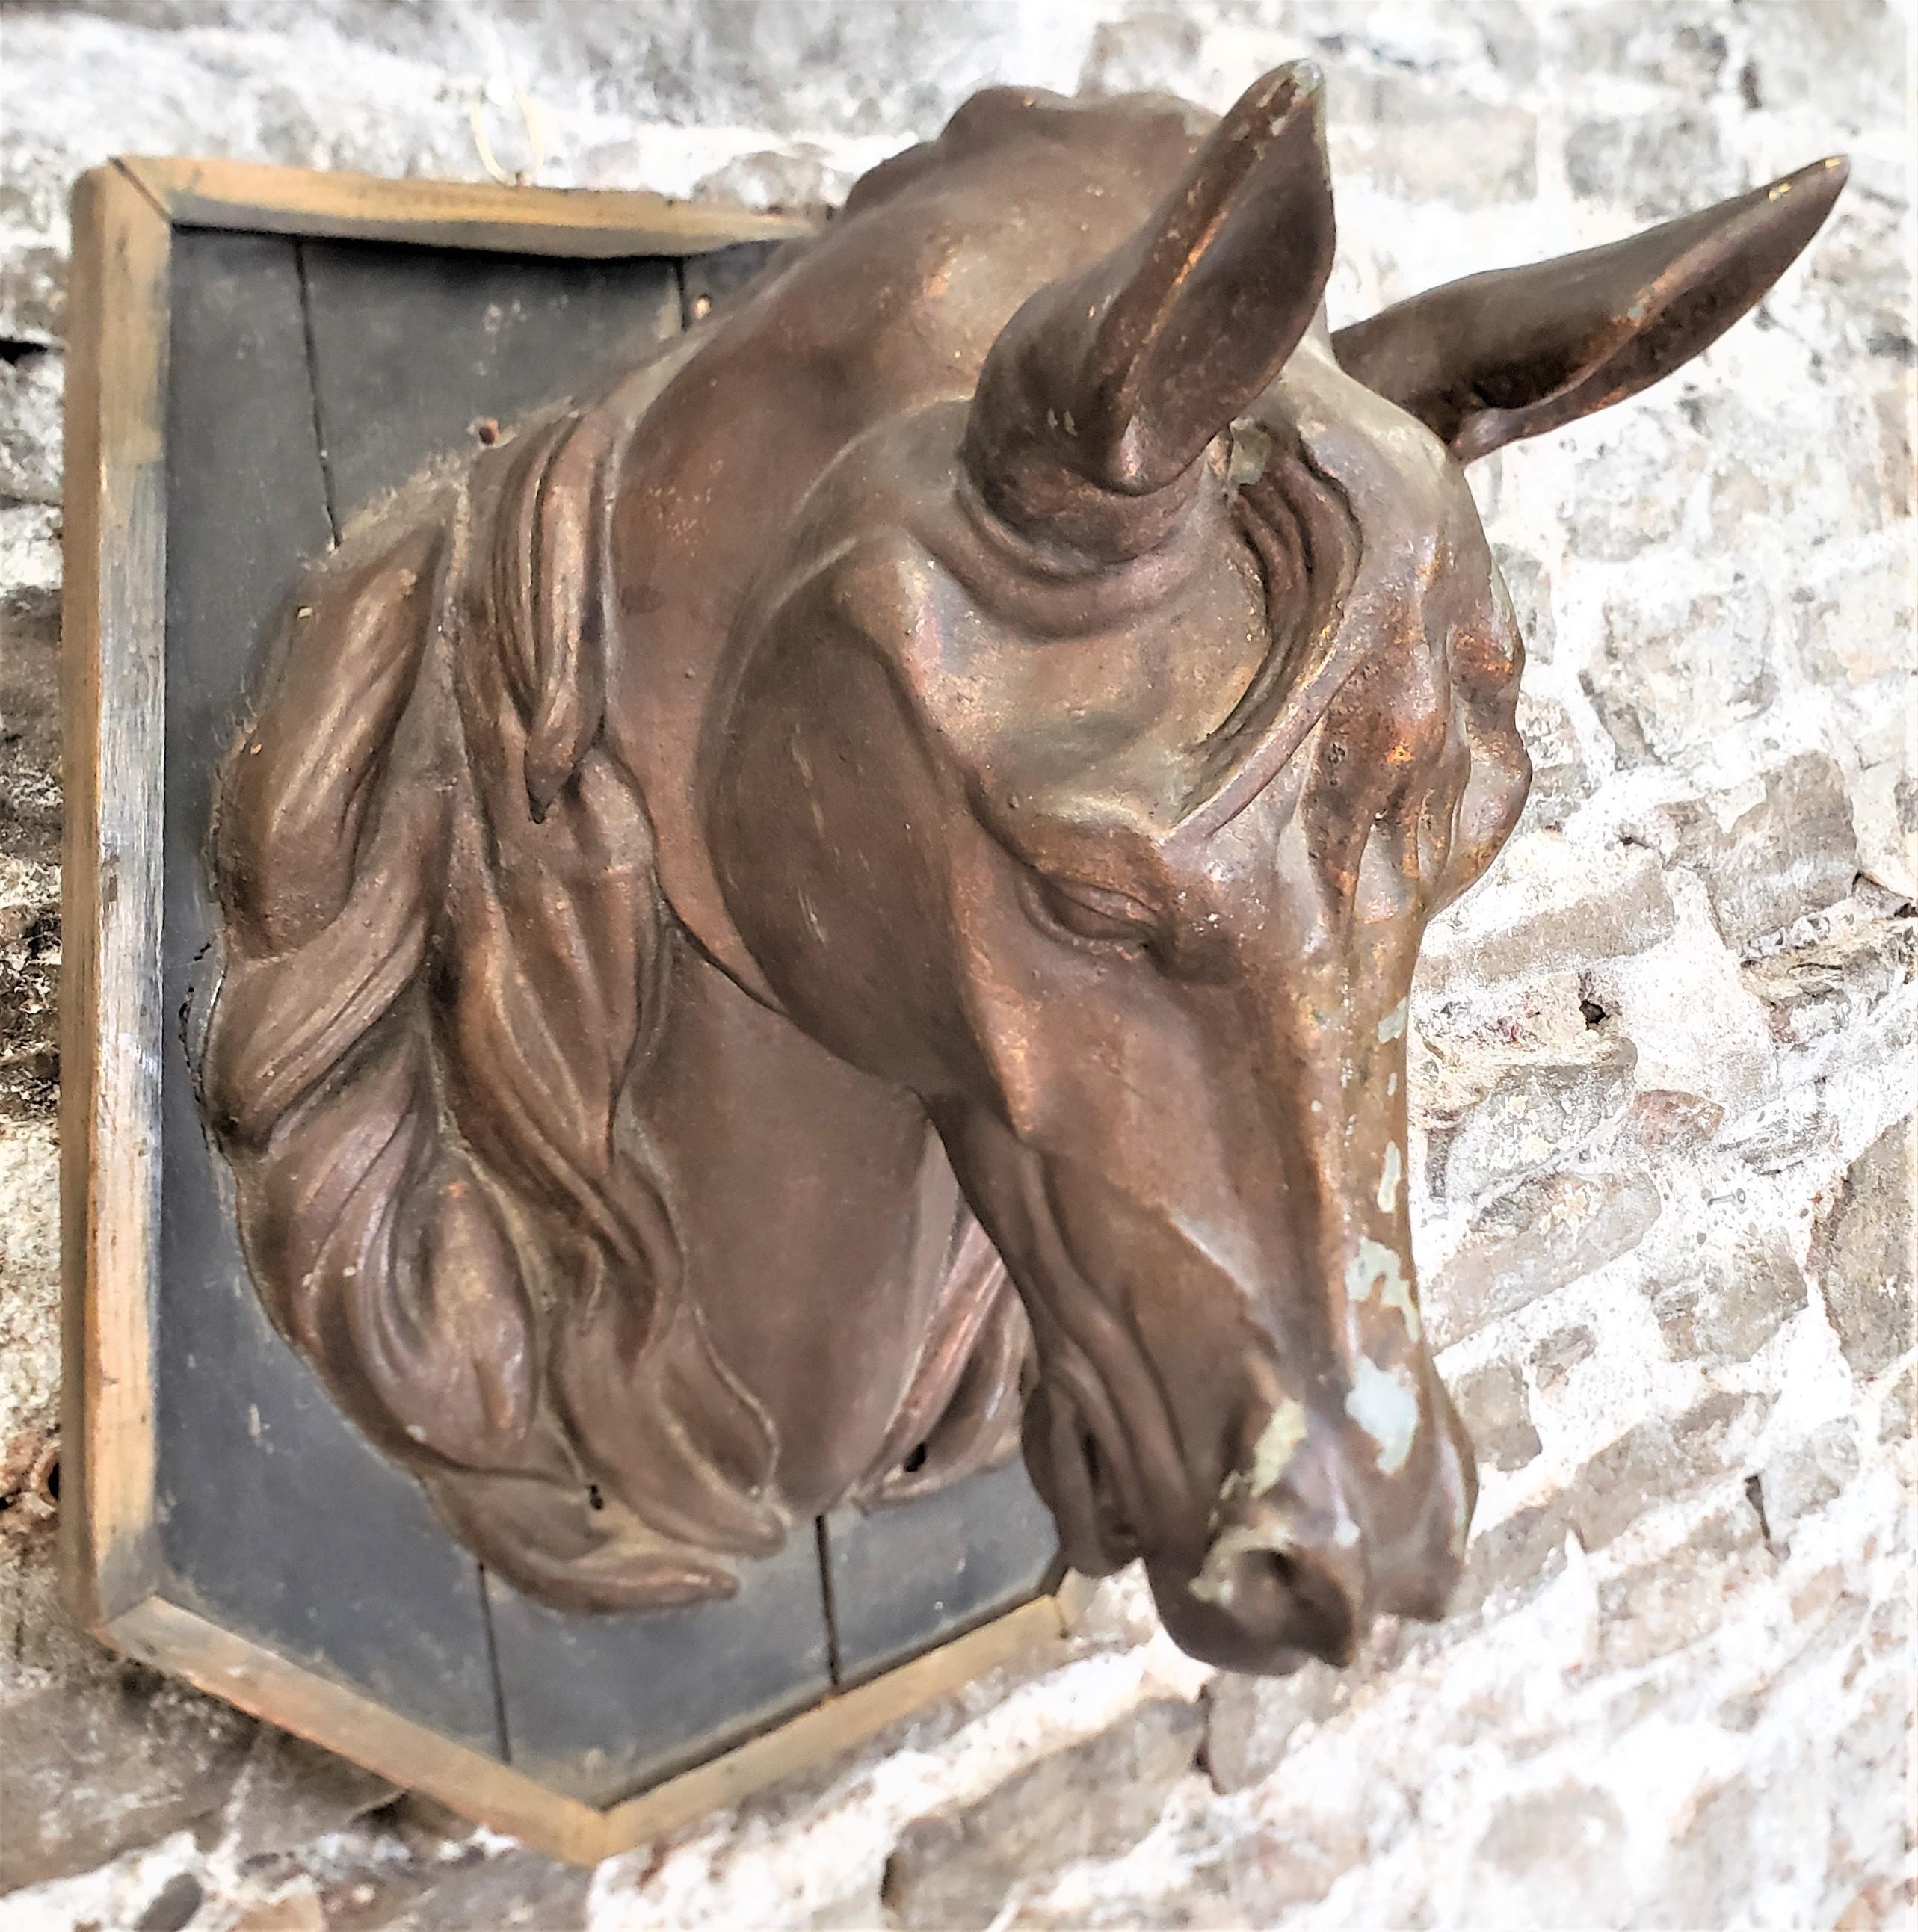 This antique butcher shop horse meat advertising sign, or Boucherie Chevaline' has no maker's marks, but presumed to have originated from France and dating to approximately 1880 and done in the period Victorian style. The ornately cast horses head